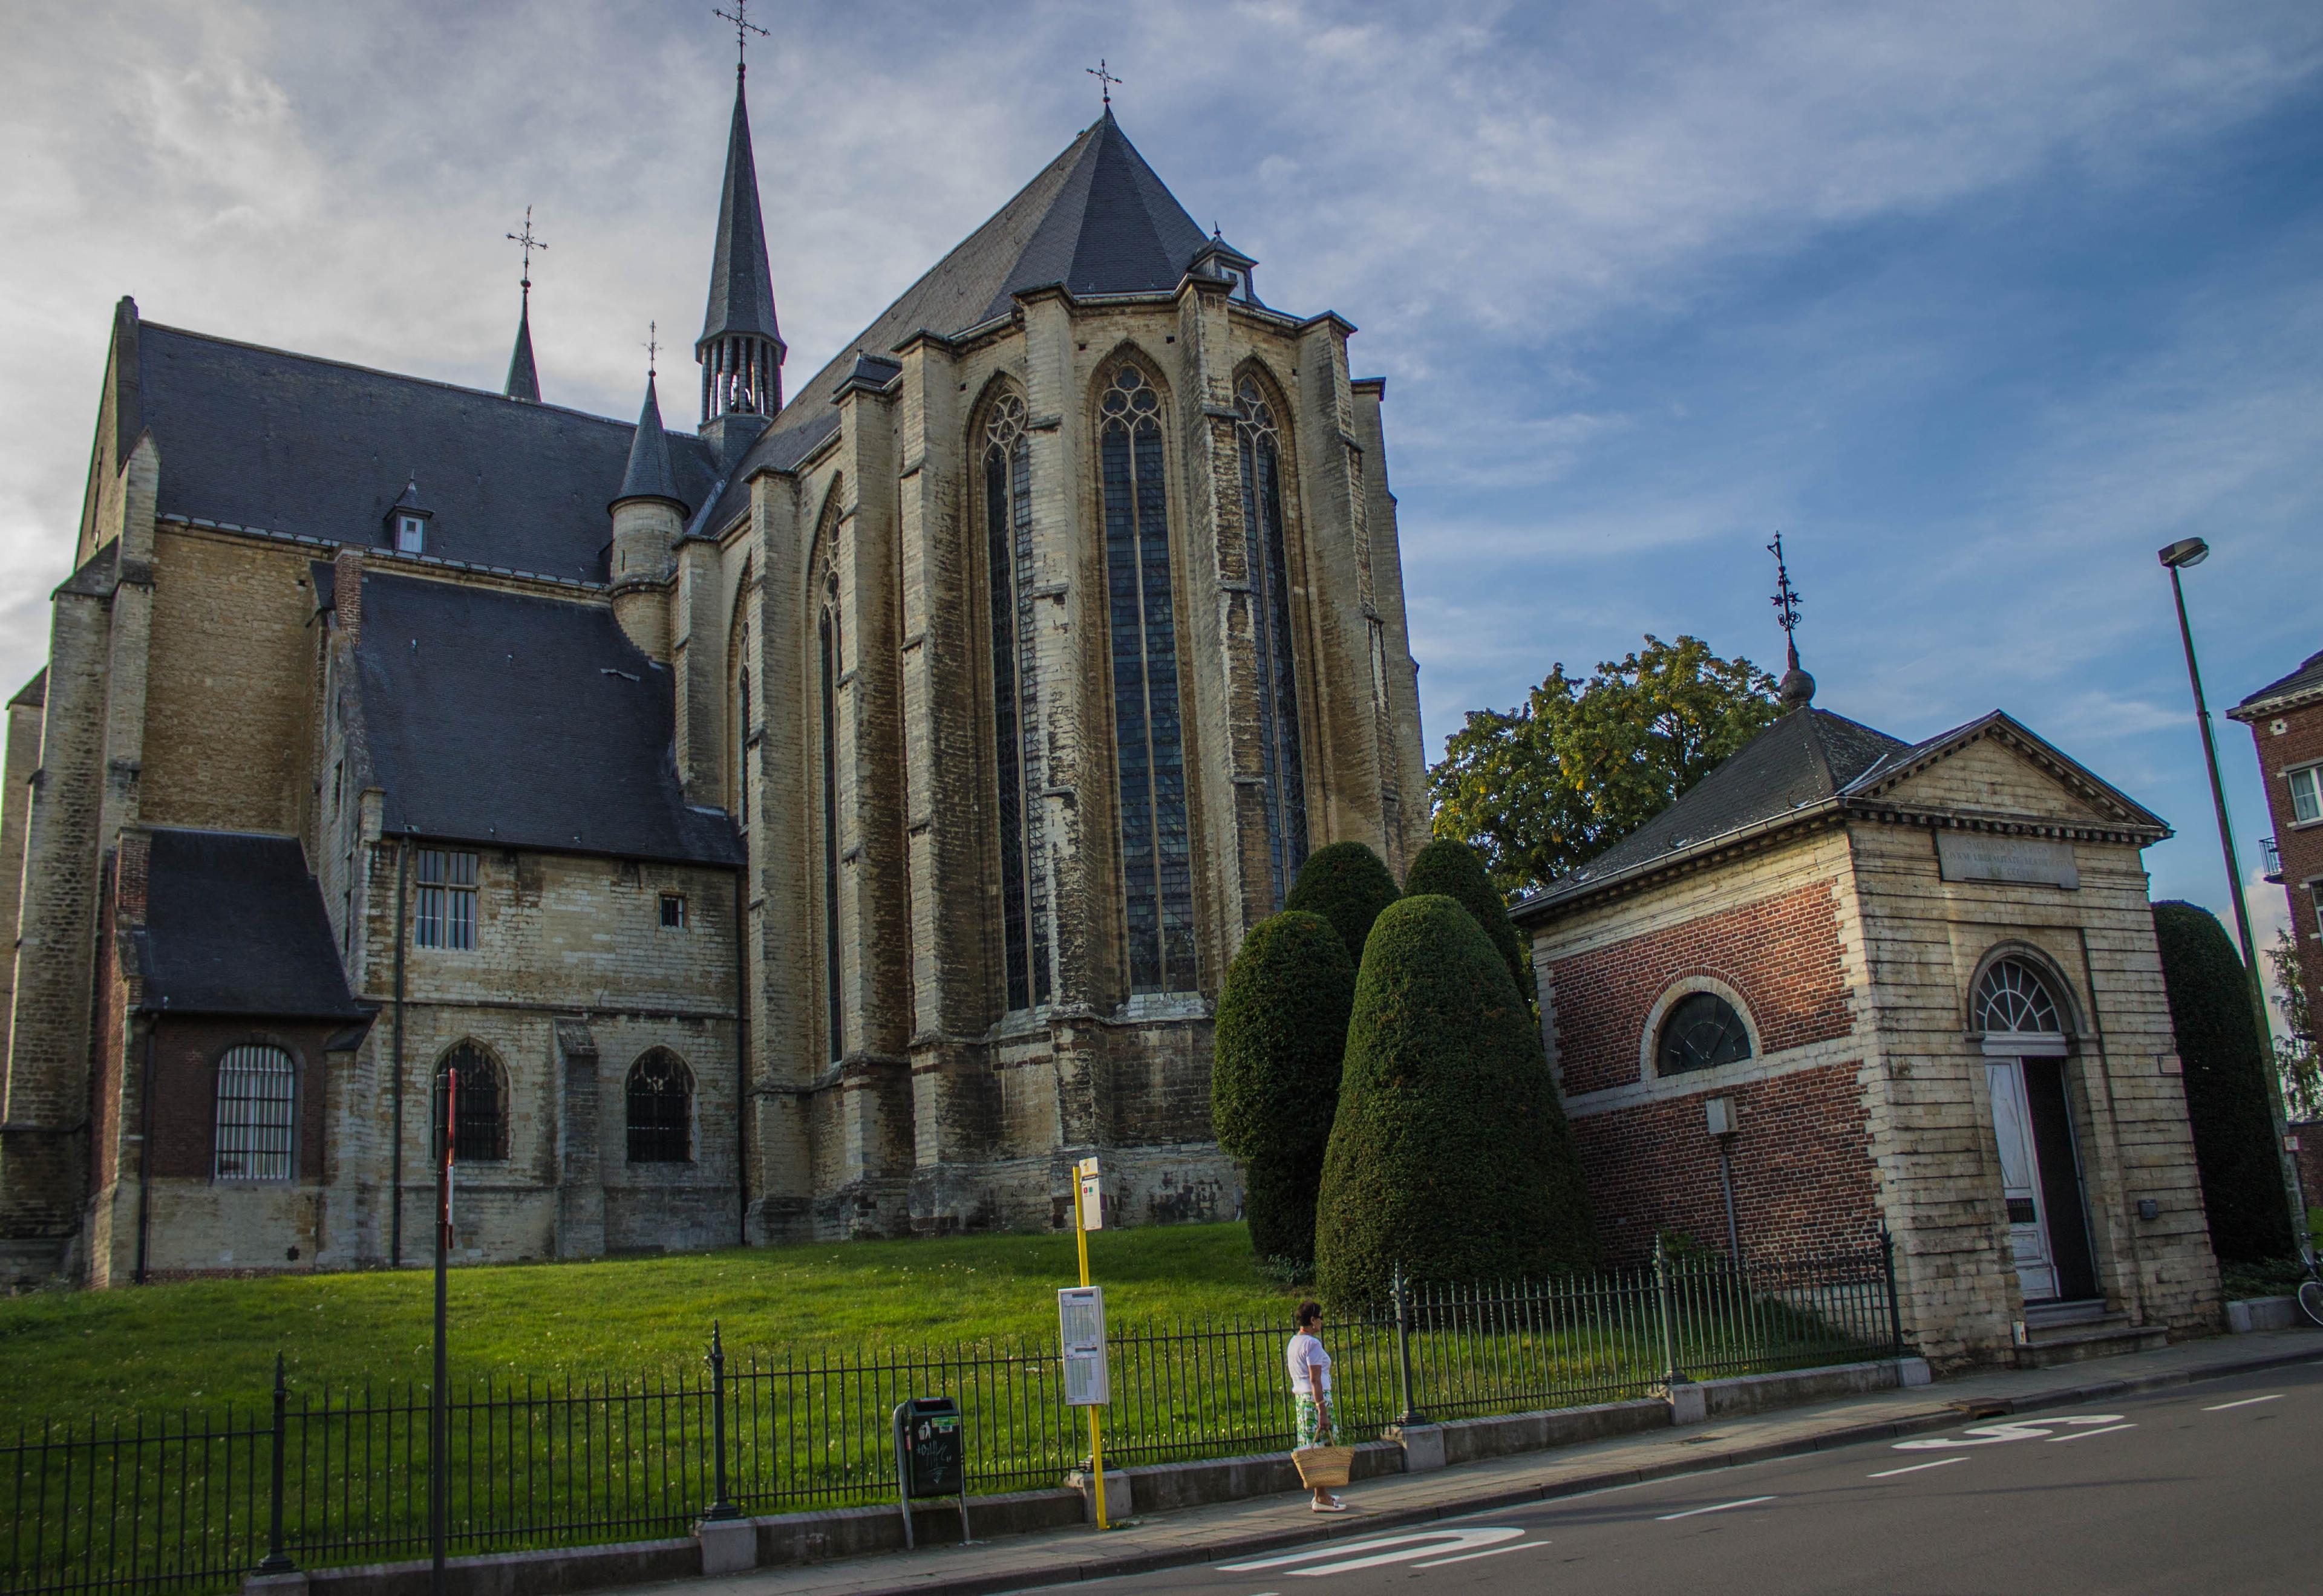 Cover image of this place Sint Kwintenskerk